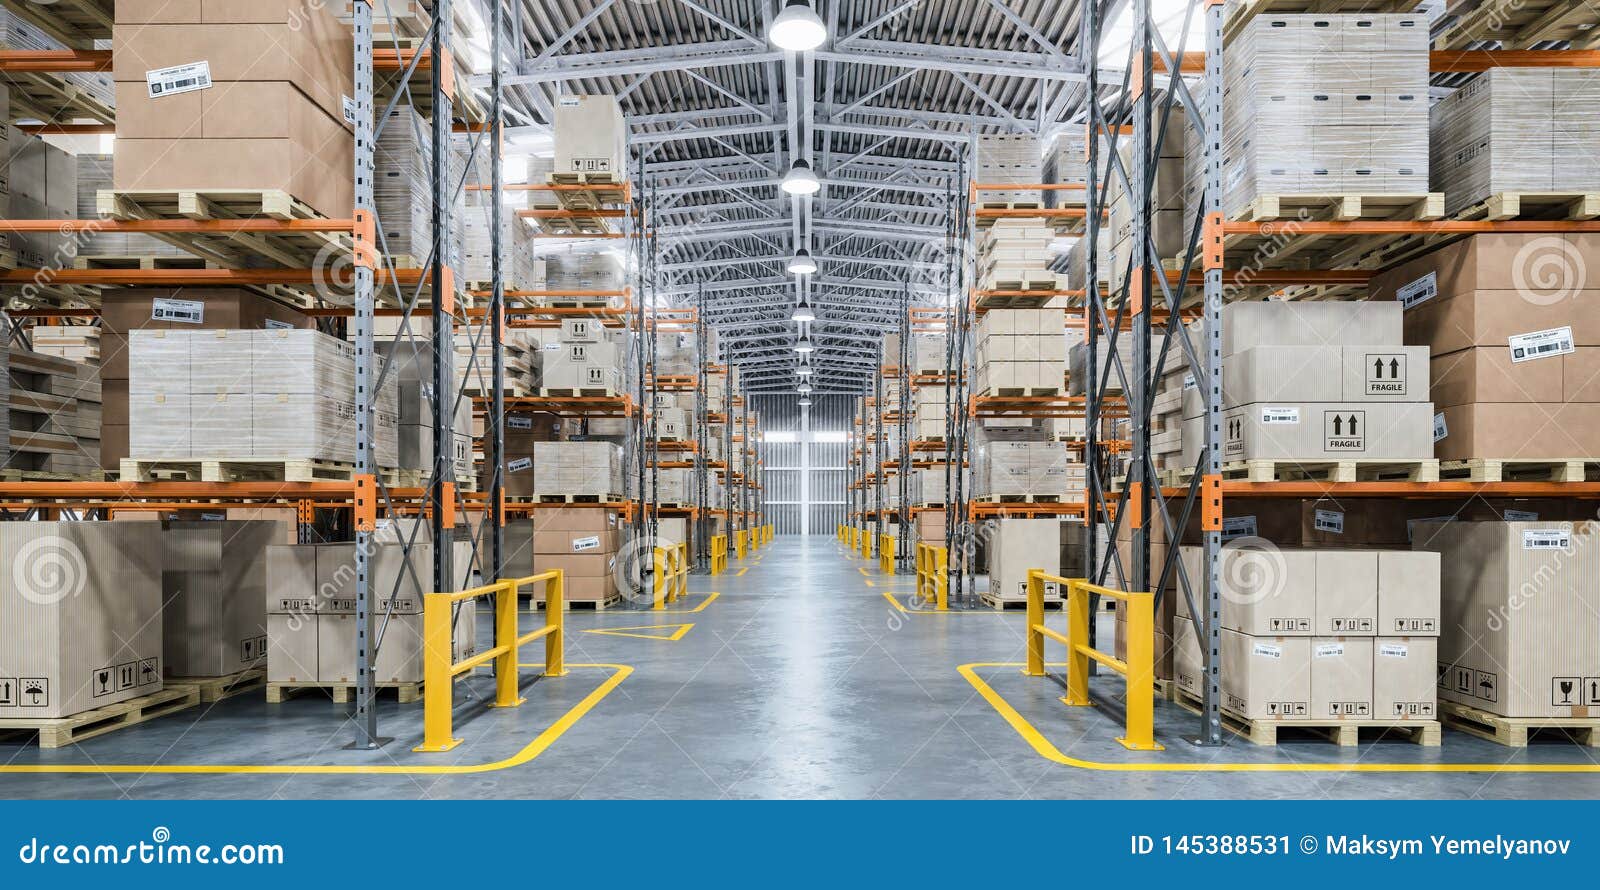 warehouse or storage and shelves with cardboard boxes. industrial background